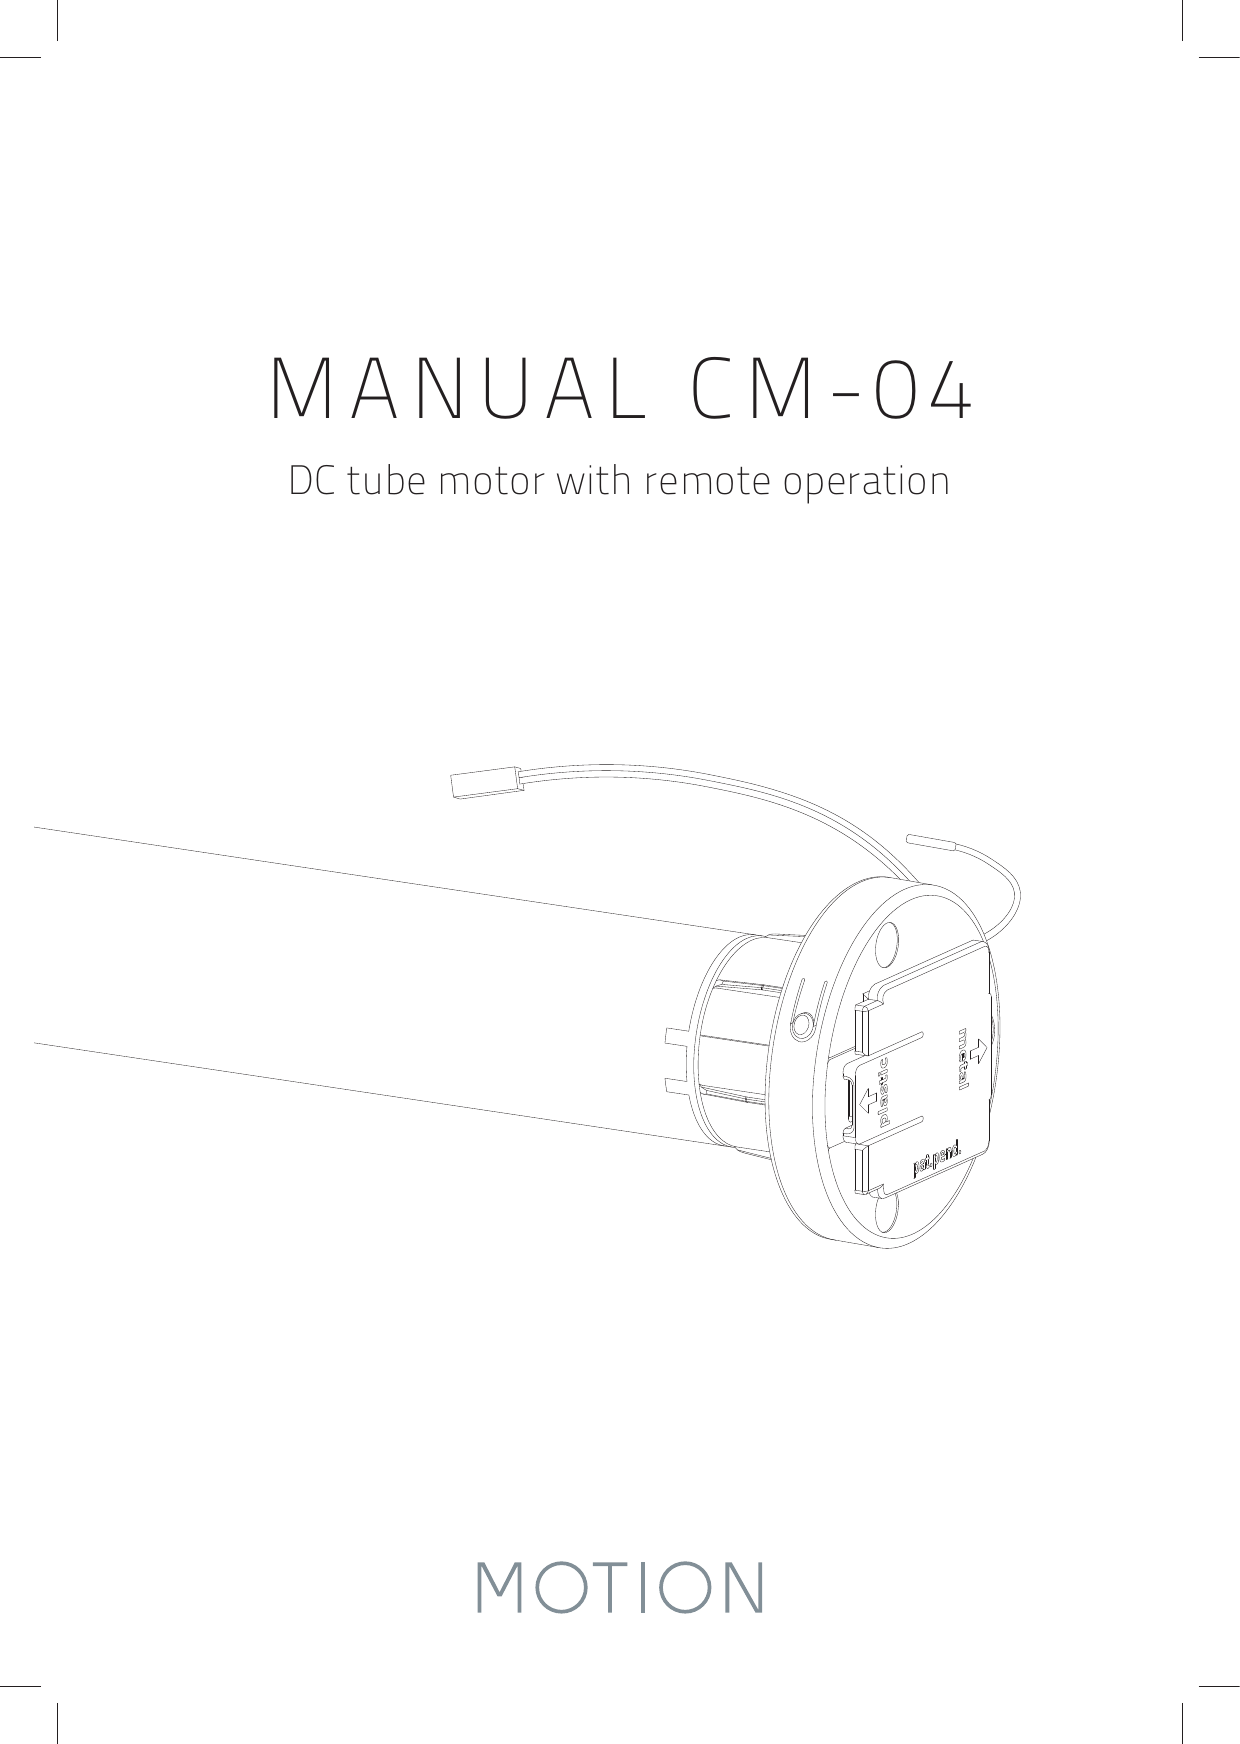 DC tube motor with remote operationMANUAL CM-04